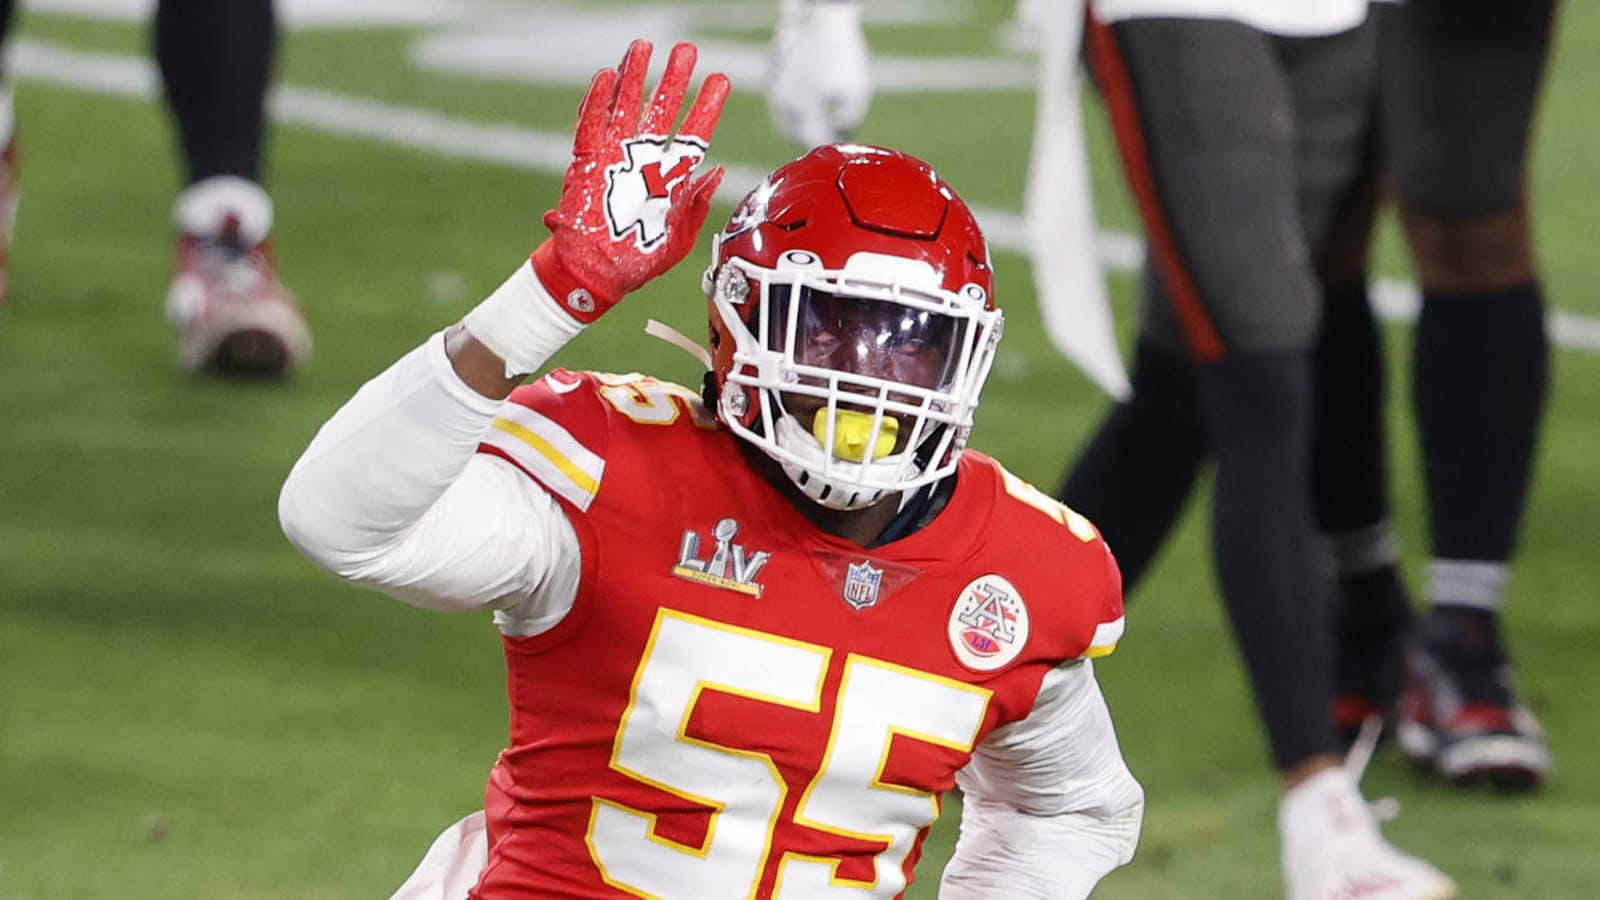 Regarding Frank Clark's legal issues, Chiefs have a decision to make